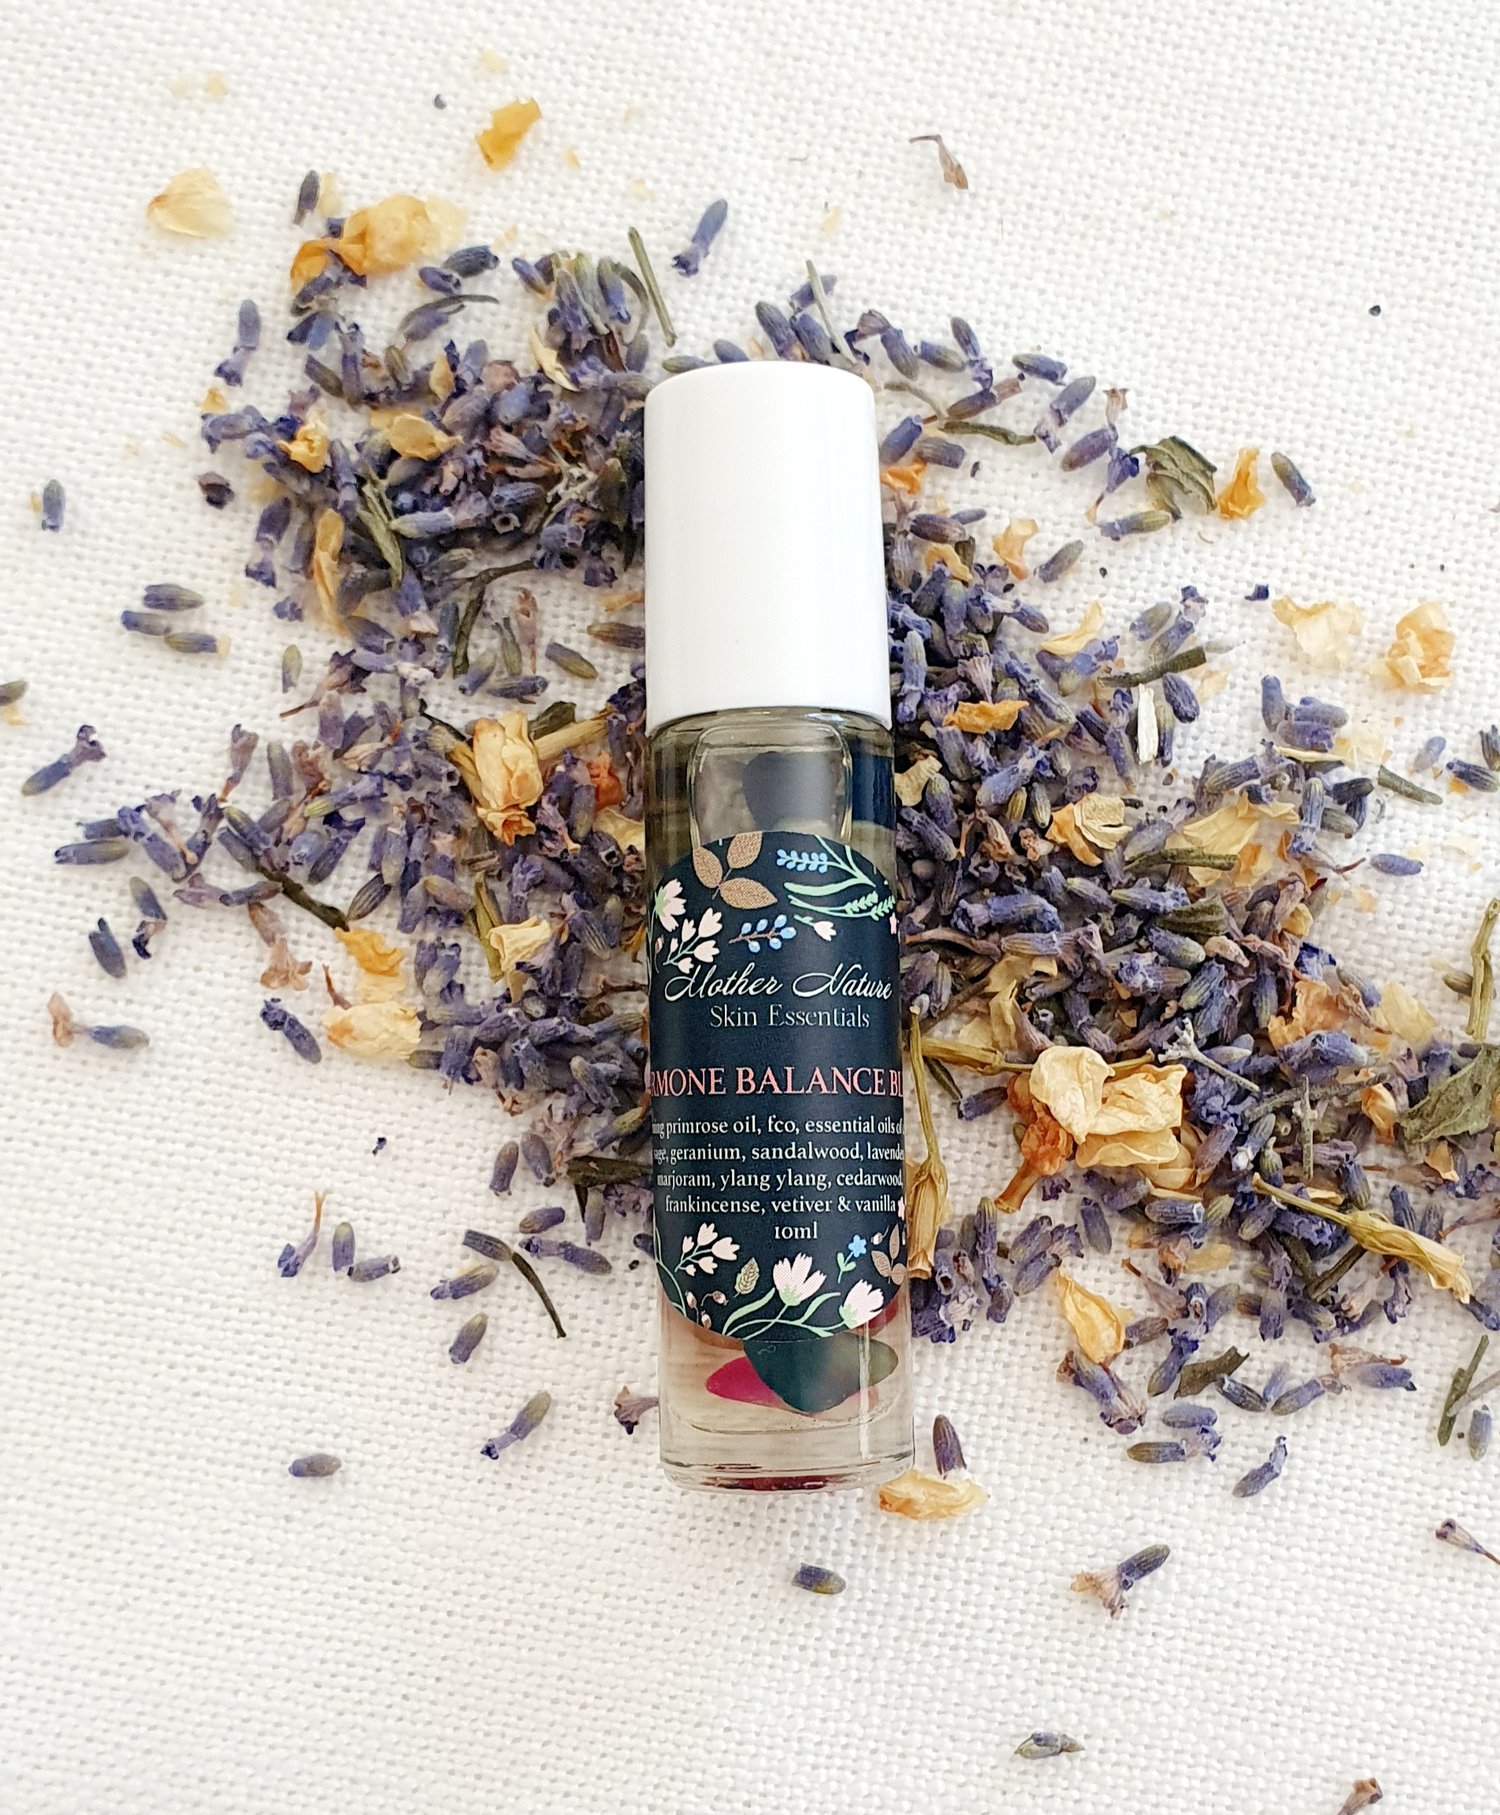 Balance Roll On Essential Healing Oil